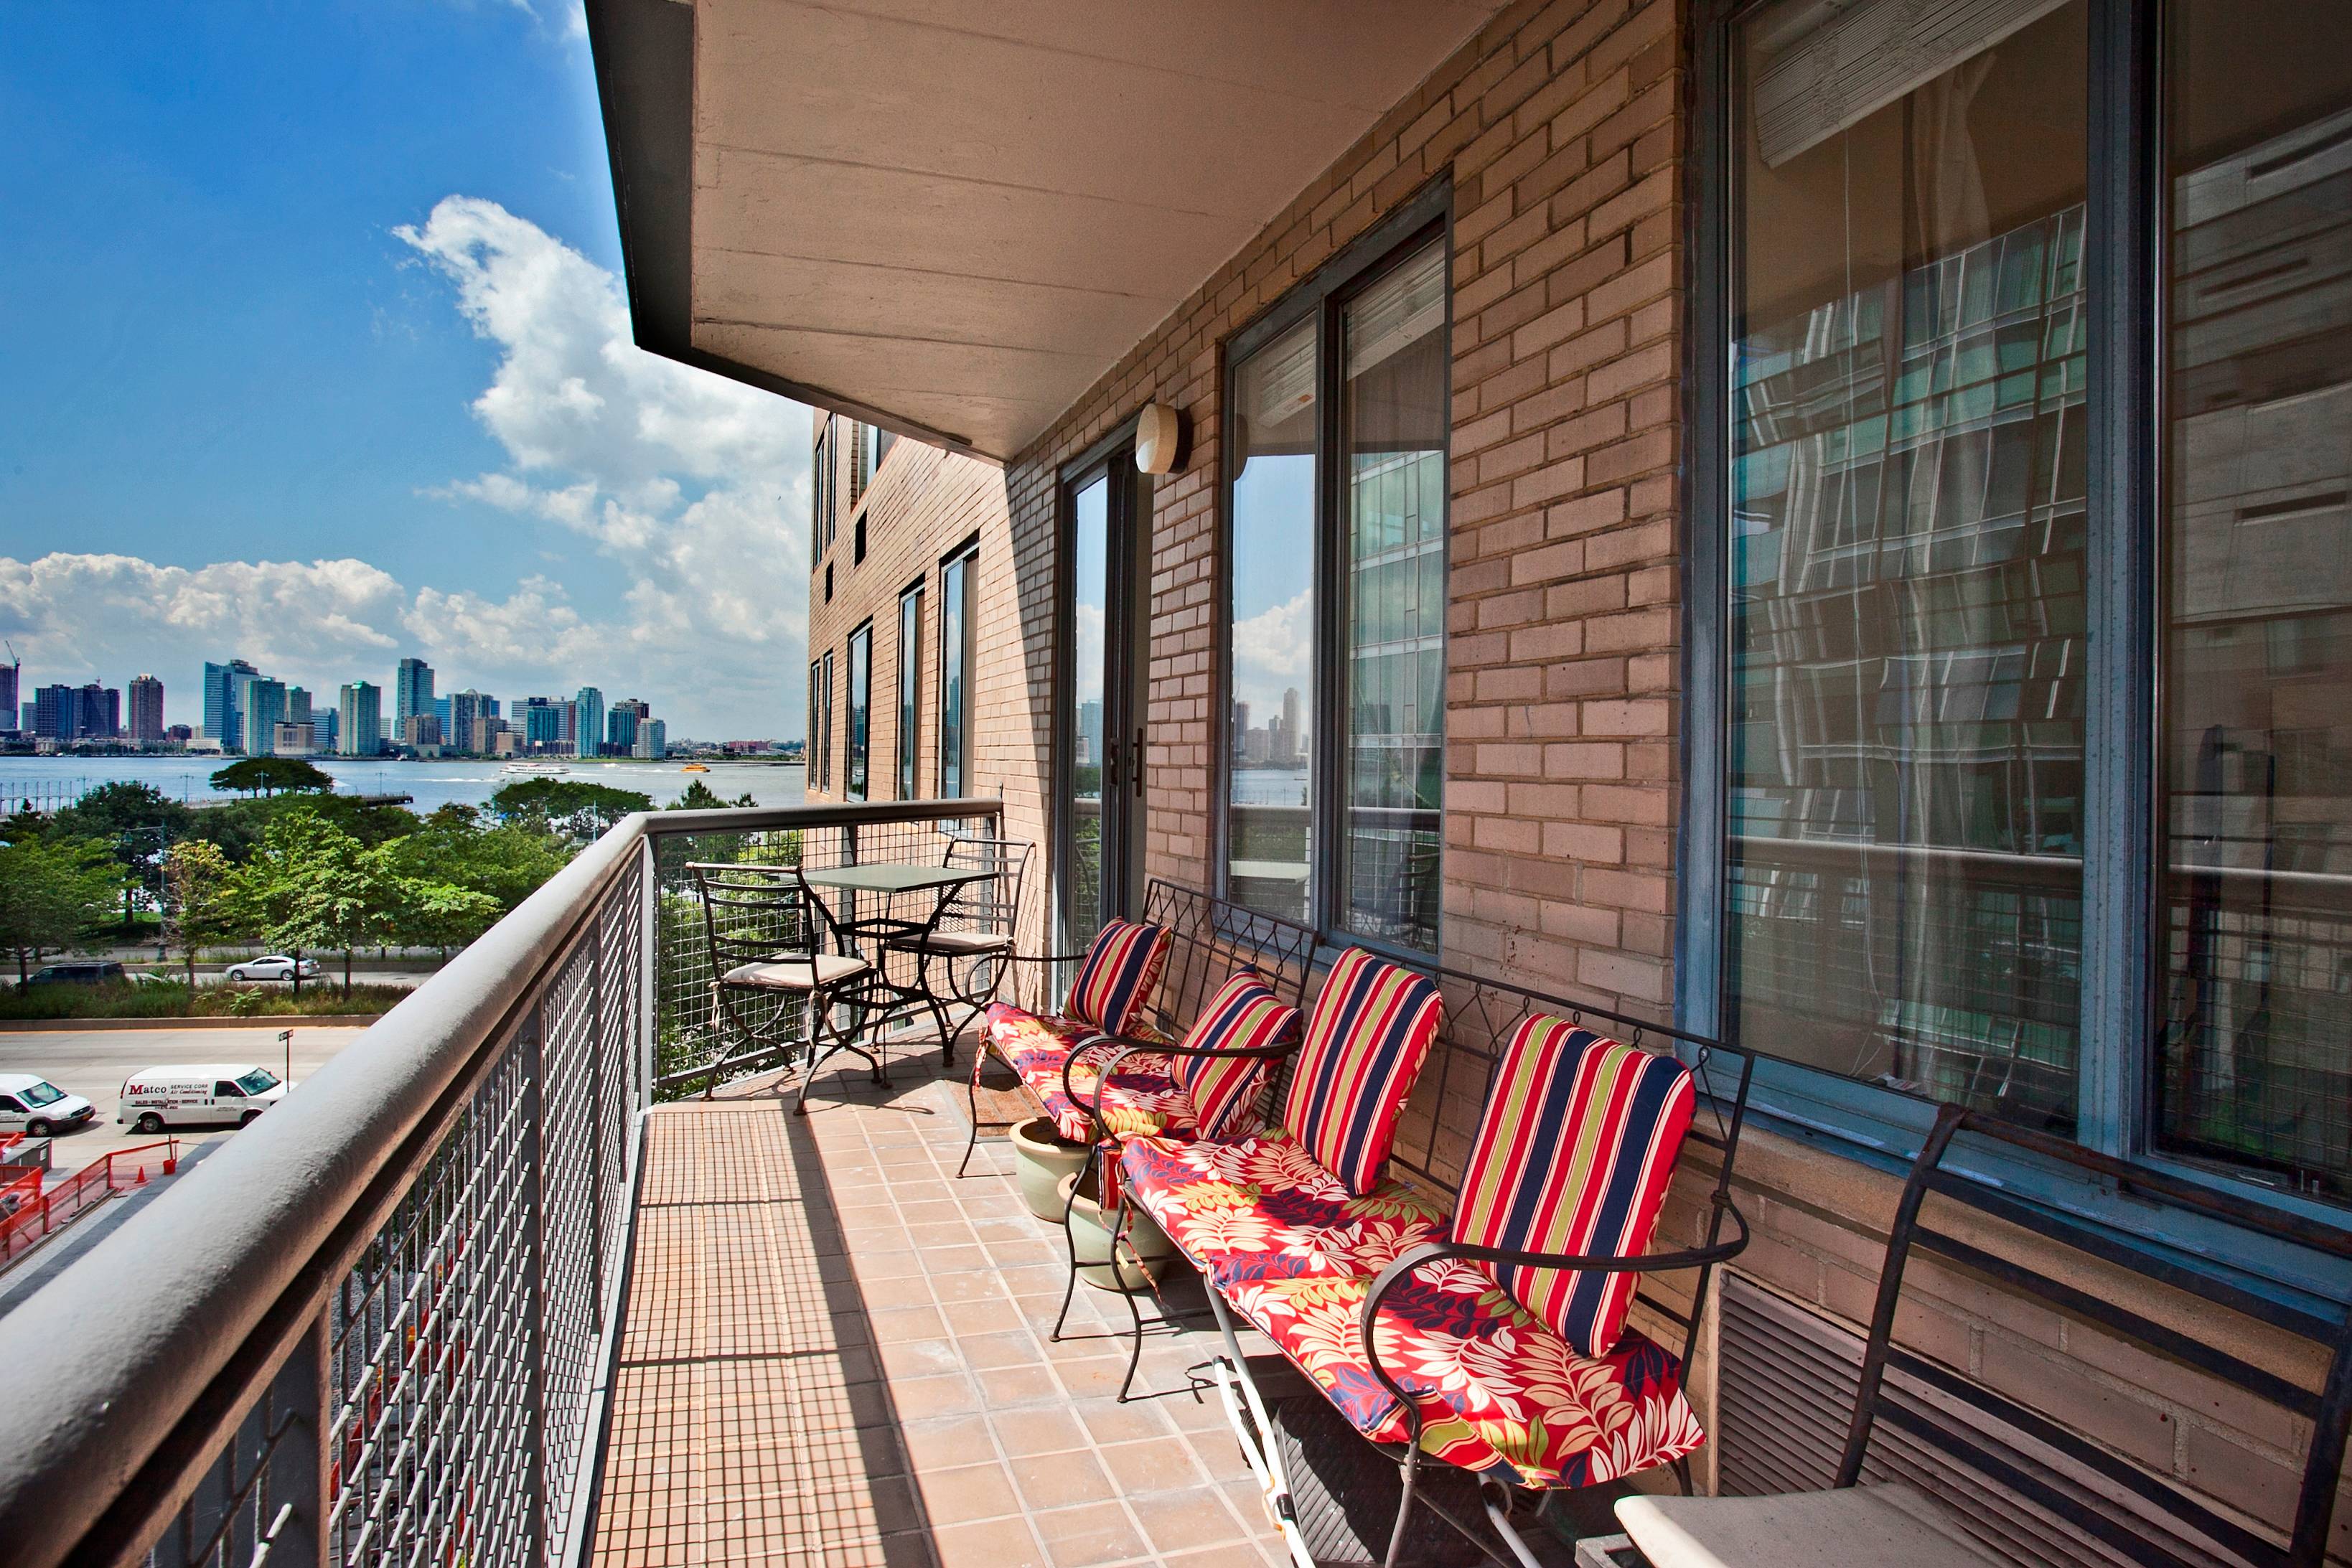 Large 1BR, with Private Balcony, River Views, Wood-Burning Fireplace, in Full-Service Luxury Co-op (Oct 15 or Nov 1)